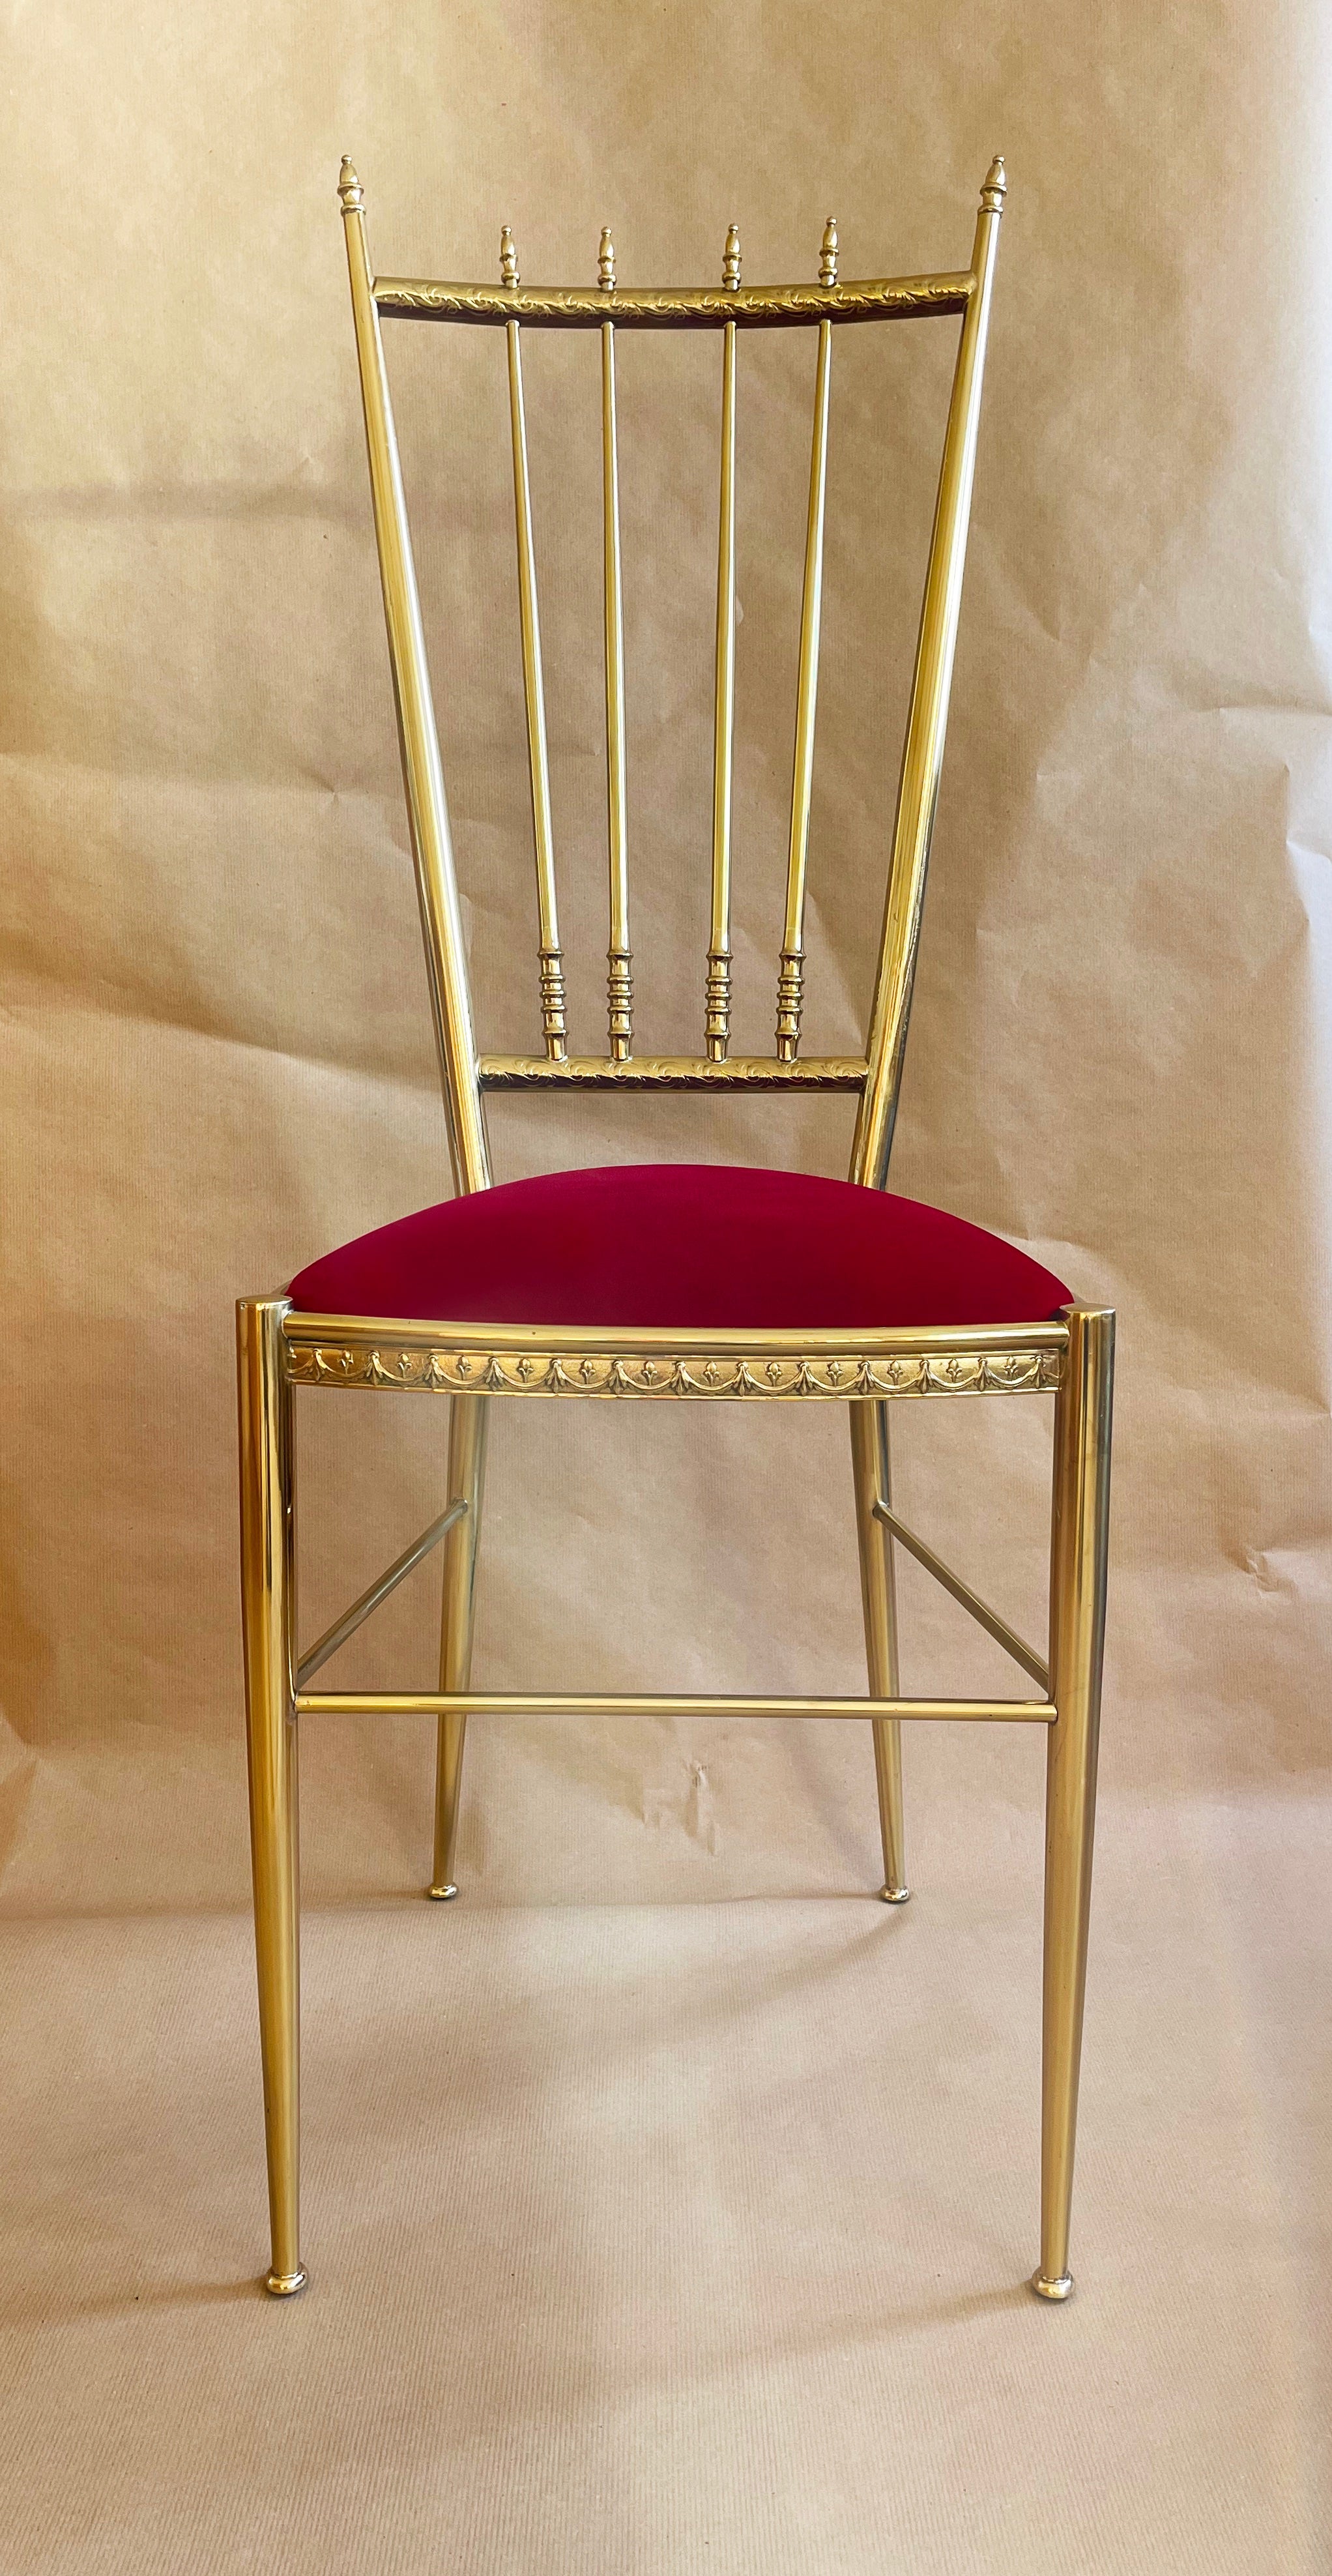 Impressive original 1960s to 1970s side chair or vanity chair made from brass. 
Features a juicy red velvet seat.
Quite unusual and beautiful composition of high end materials & craftsmanship indeed.
Made in Italy by unknown maker to the highest